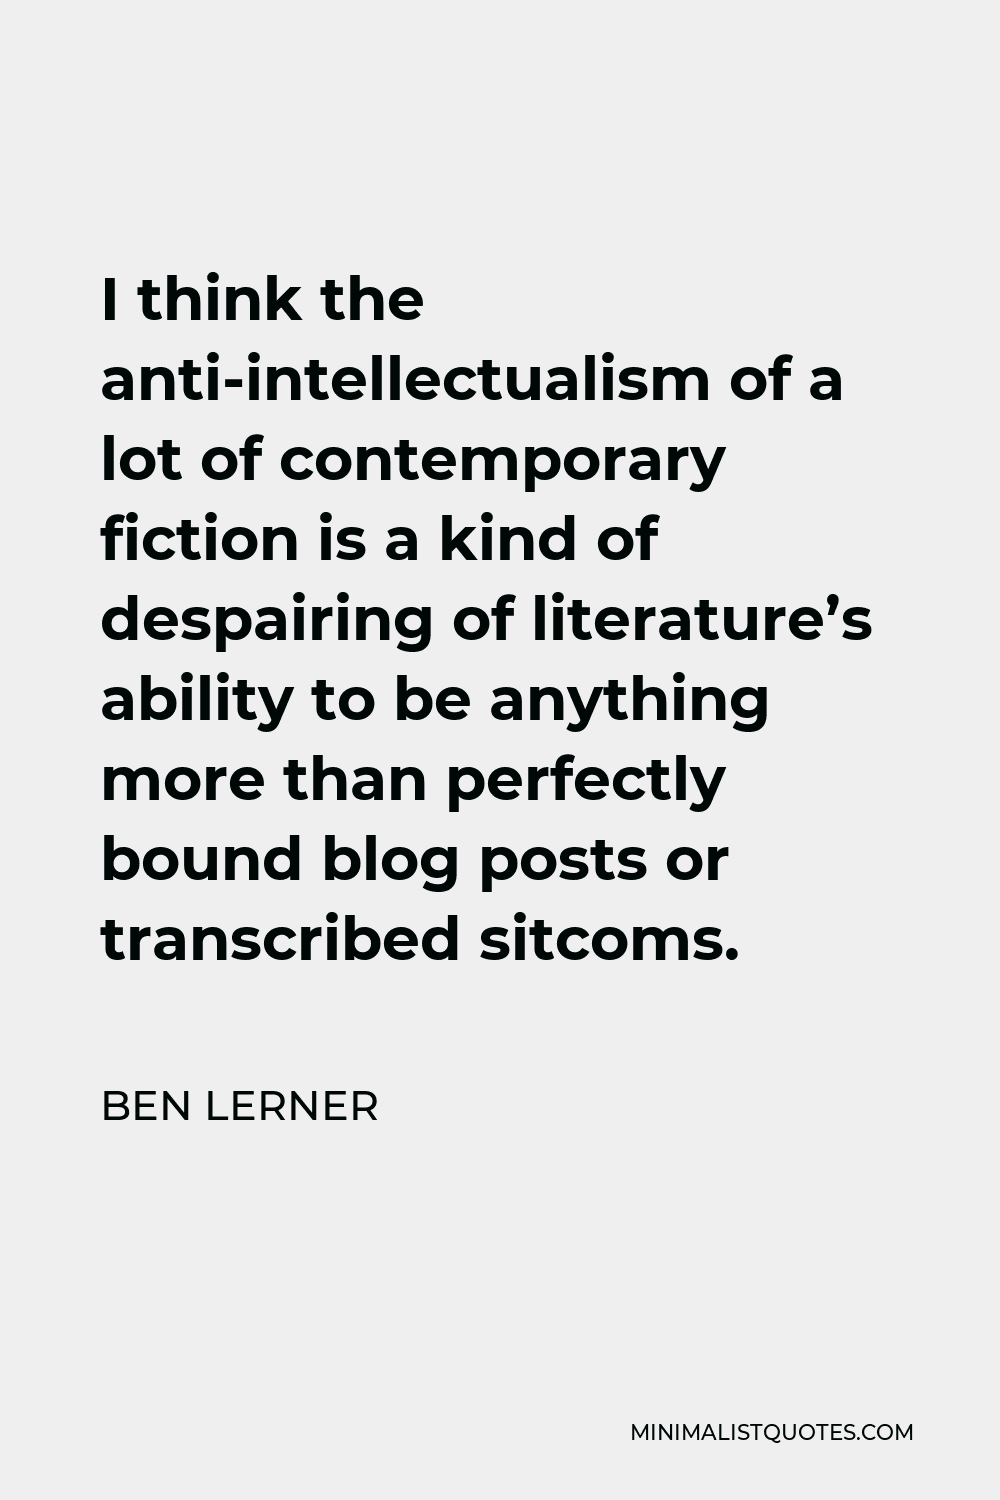 Ben Lerner Quote - I think the anti-intellectualism of a lot of contemporary fiction is a kind of despairing of literature’s ability to be anything more than perfectly bound blog posts or transcribed sitcoms.